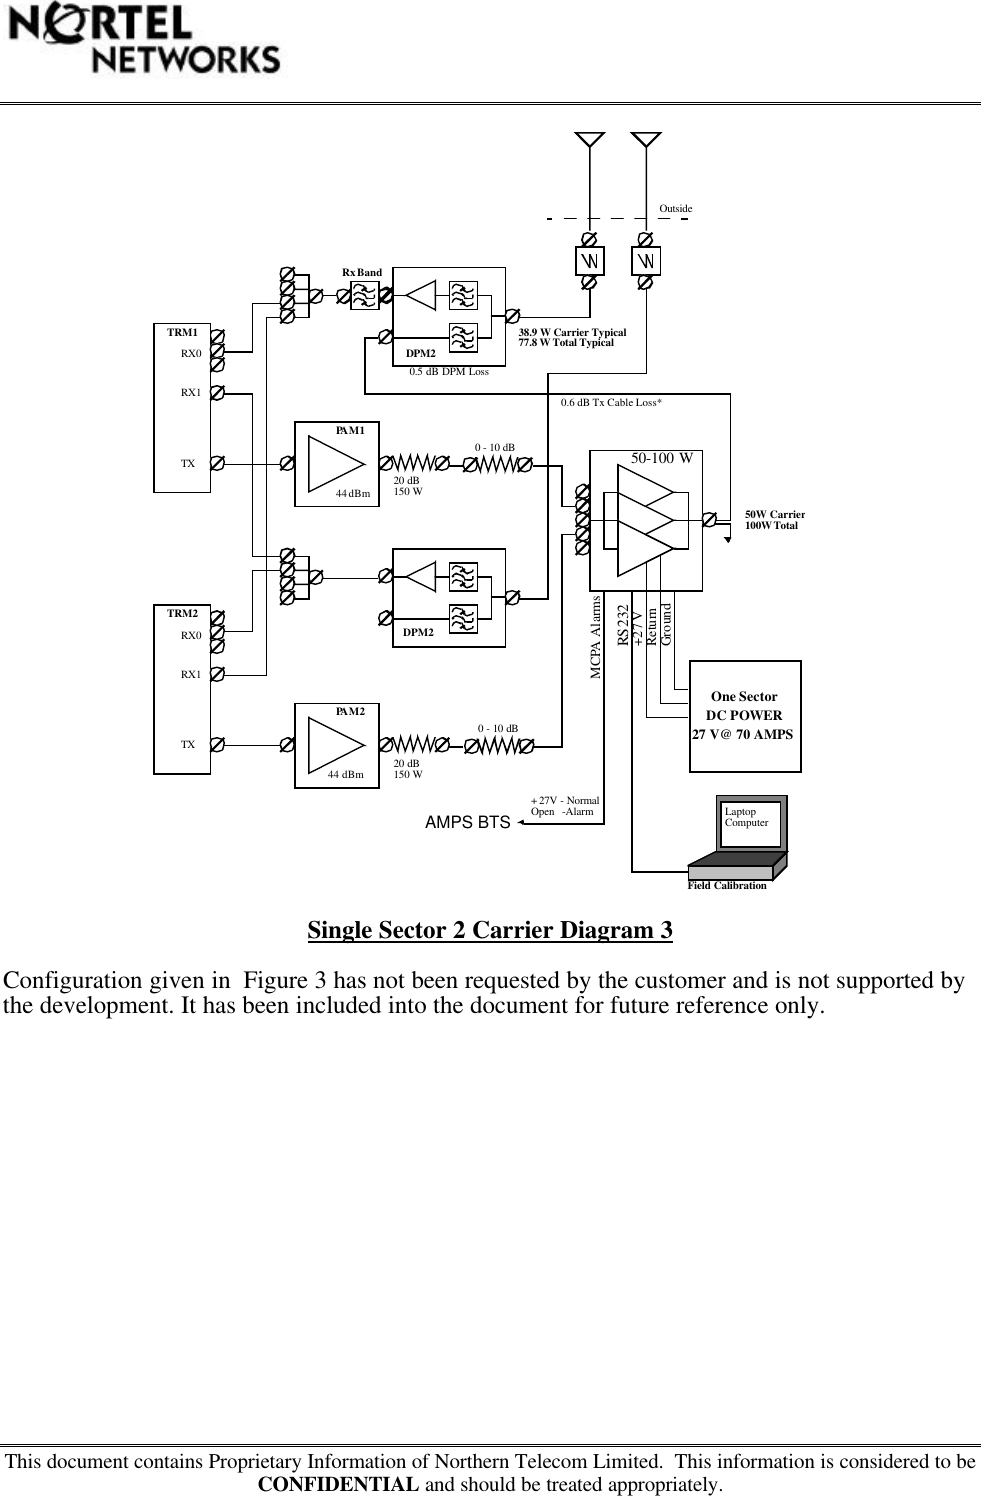 This document contains Proprietary Information of Northern Telecom Limited.  This information is considered to beCONFIDENTIAL and should be treated appropriately.Single Sector 2 Carrier Diagram 3Configuration given in  Figure 3 has not been requested by the customer and is not supported bythe development. It has been included into the document for future reference only.RS232+27 VReturnGround50-100 W20 dB150 WOutsideLaptopComputerDC POWER27 V@ 70 AMPSOne SectorTRM1RX0RX1TXTRM2RX0RX1TXPAM2PAM144 dBm44 dBmDPM2DPM220 dB150 WField Calibration50W Carrier100W TotalRx Band0 - 10 dB0 - 10 dB0.6 dB Tx Cable Loss*0.5 dB DPM Loss38.9 W Carrier Typical77.8 W Total TypicalMCPA Alarms+ 27V - NormalOpen   -AlarmAMPS BTS